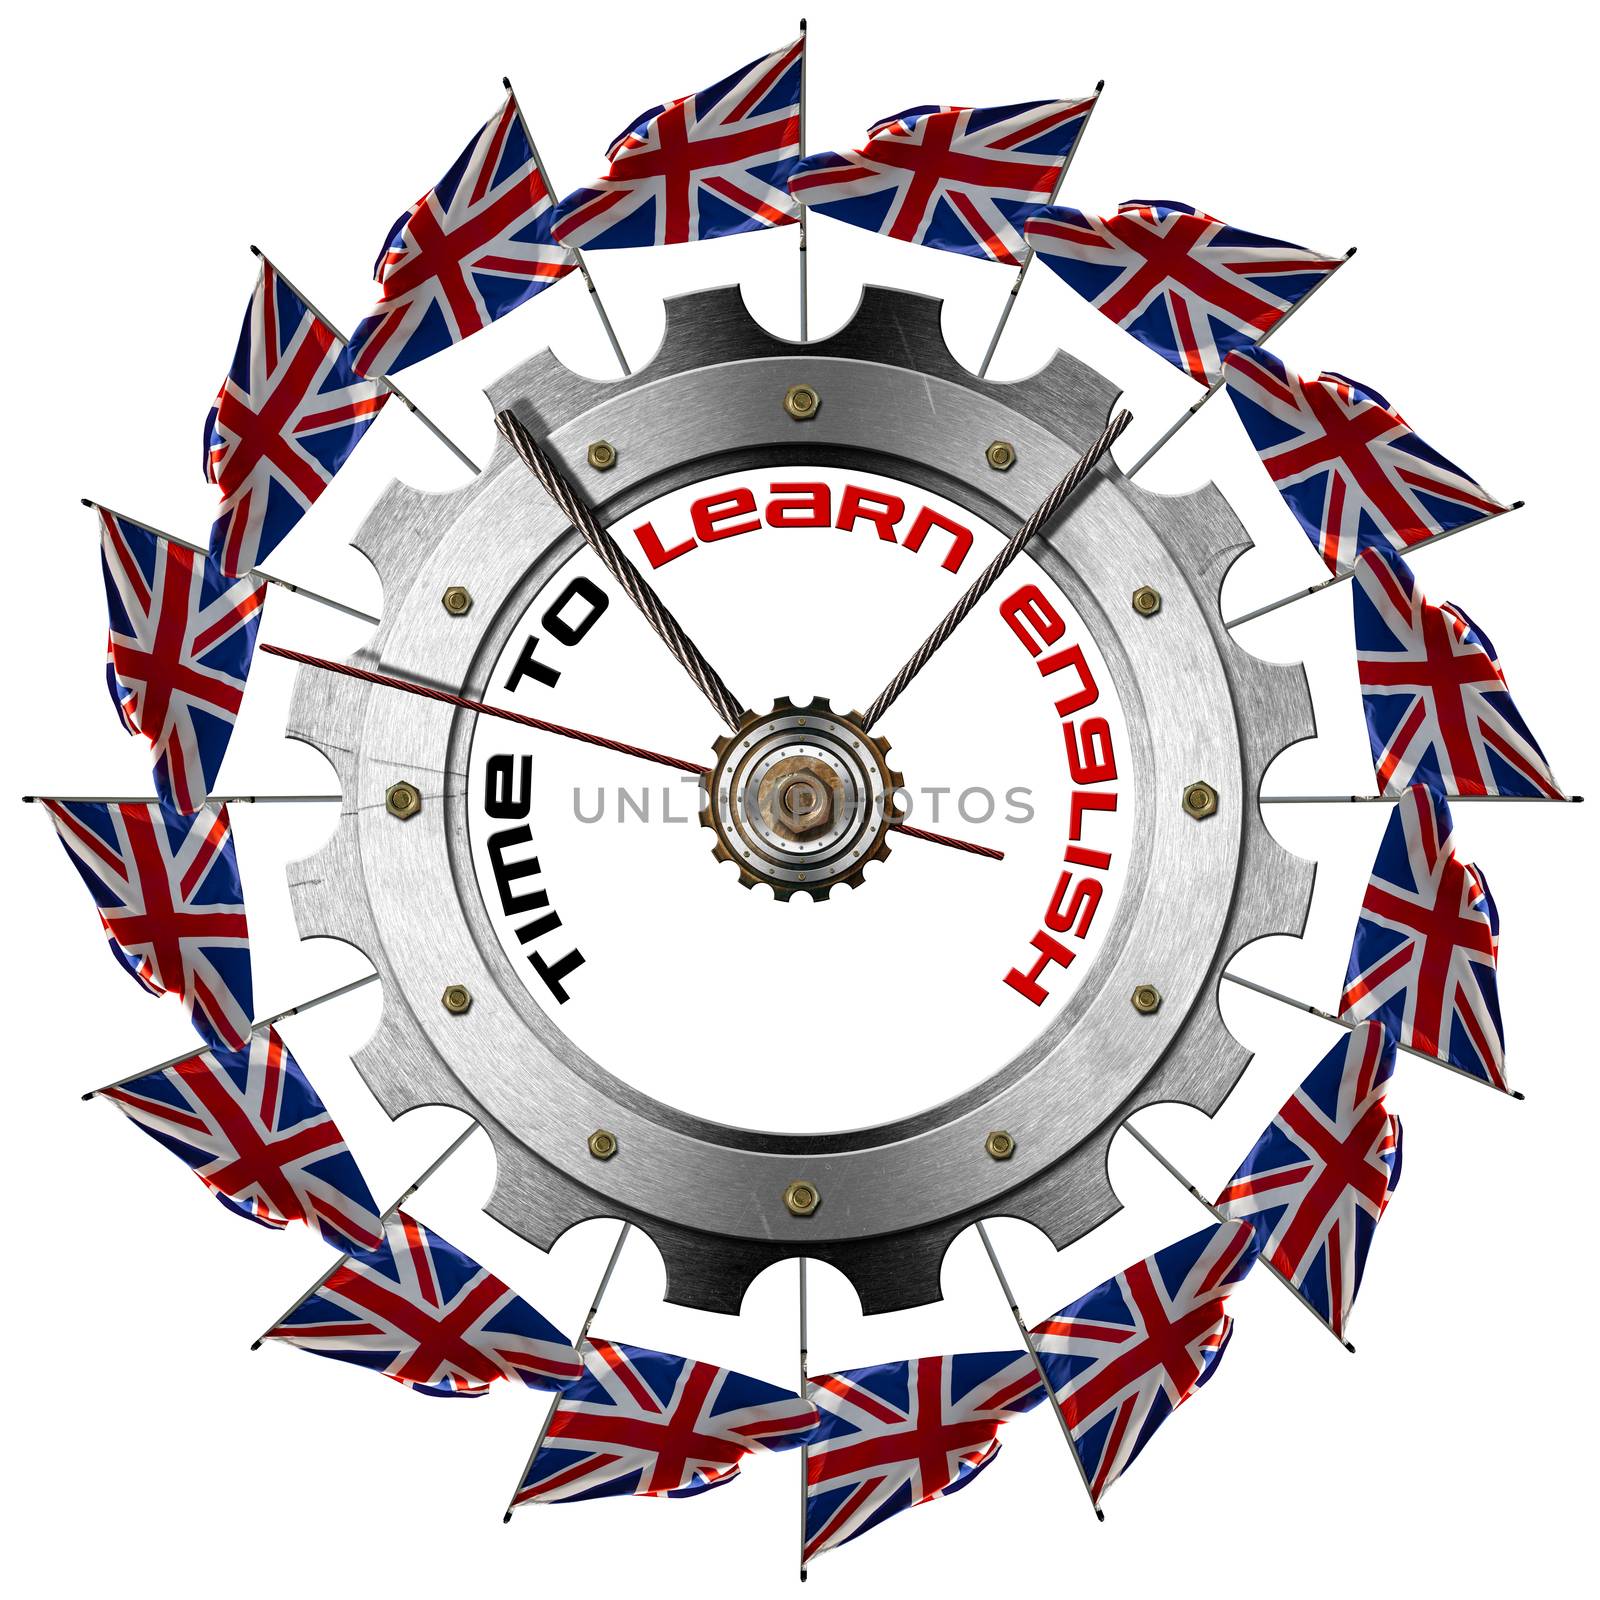 Metal clock gear-shaped with UK flags and phrase "Time to Learn English" on a white background
